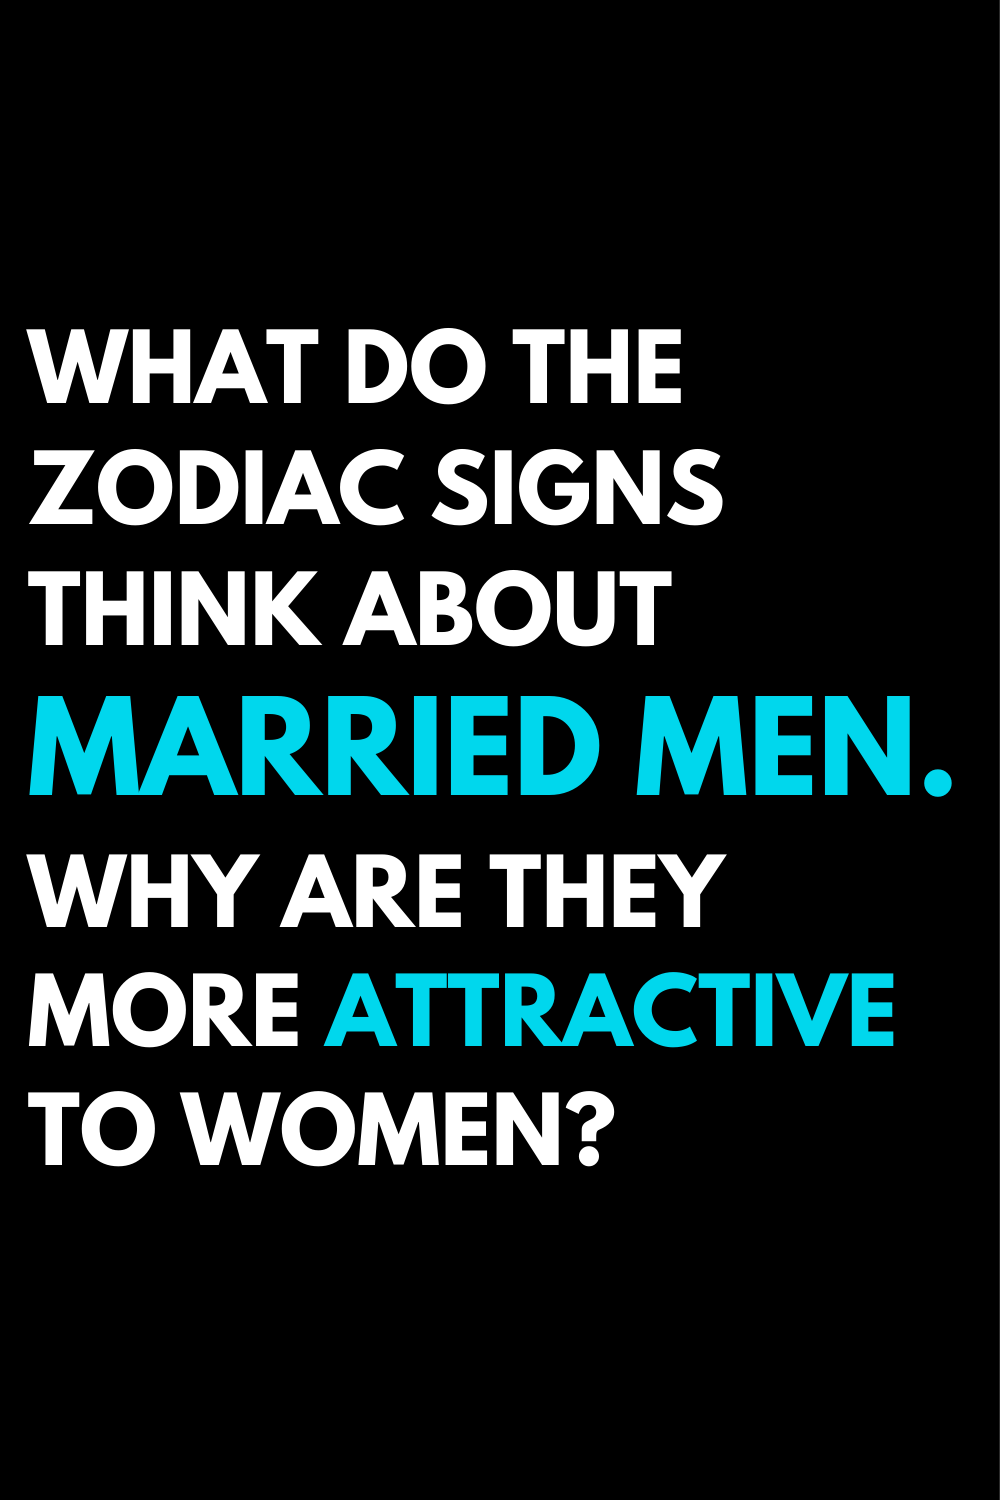 What do the zodiac signs think about married men. Why are they more attractive to women?